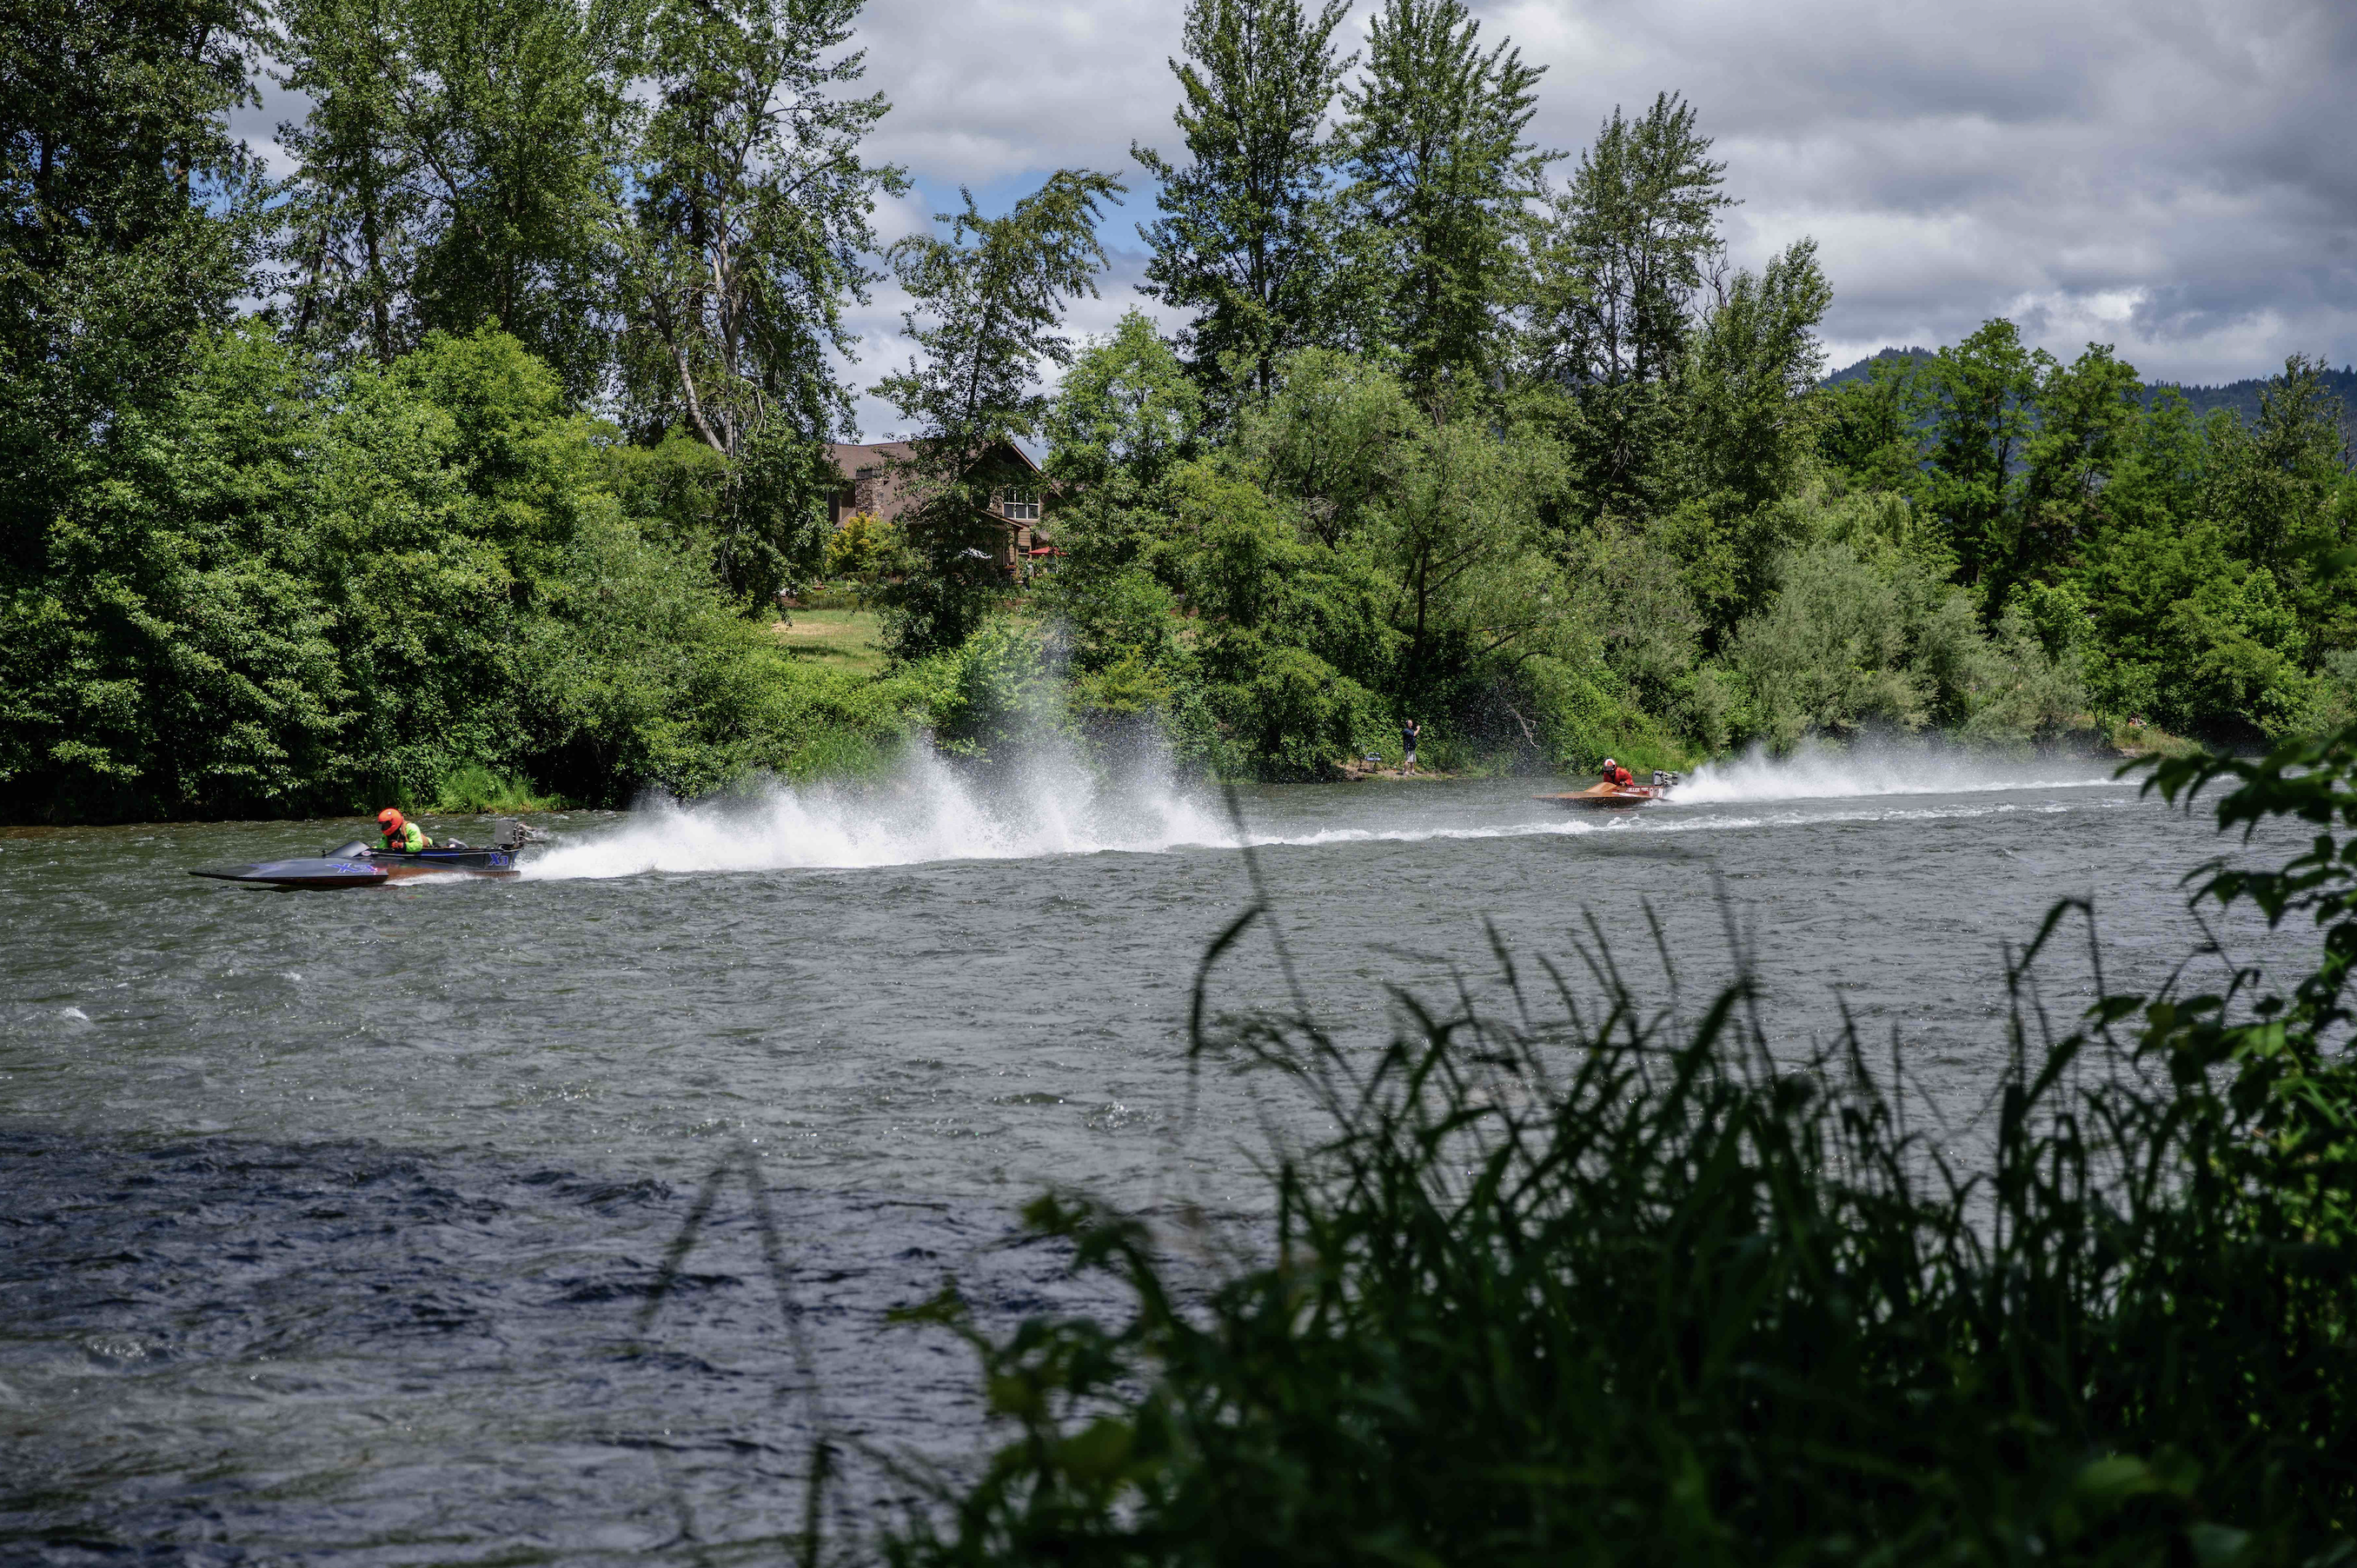 Two jet skis are cruising down the Rogue River, leaving a rift of water behind them.